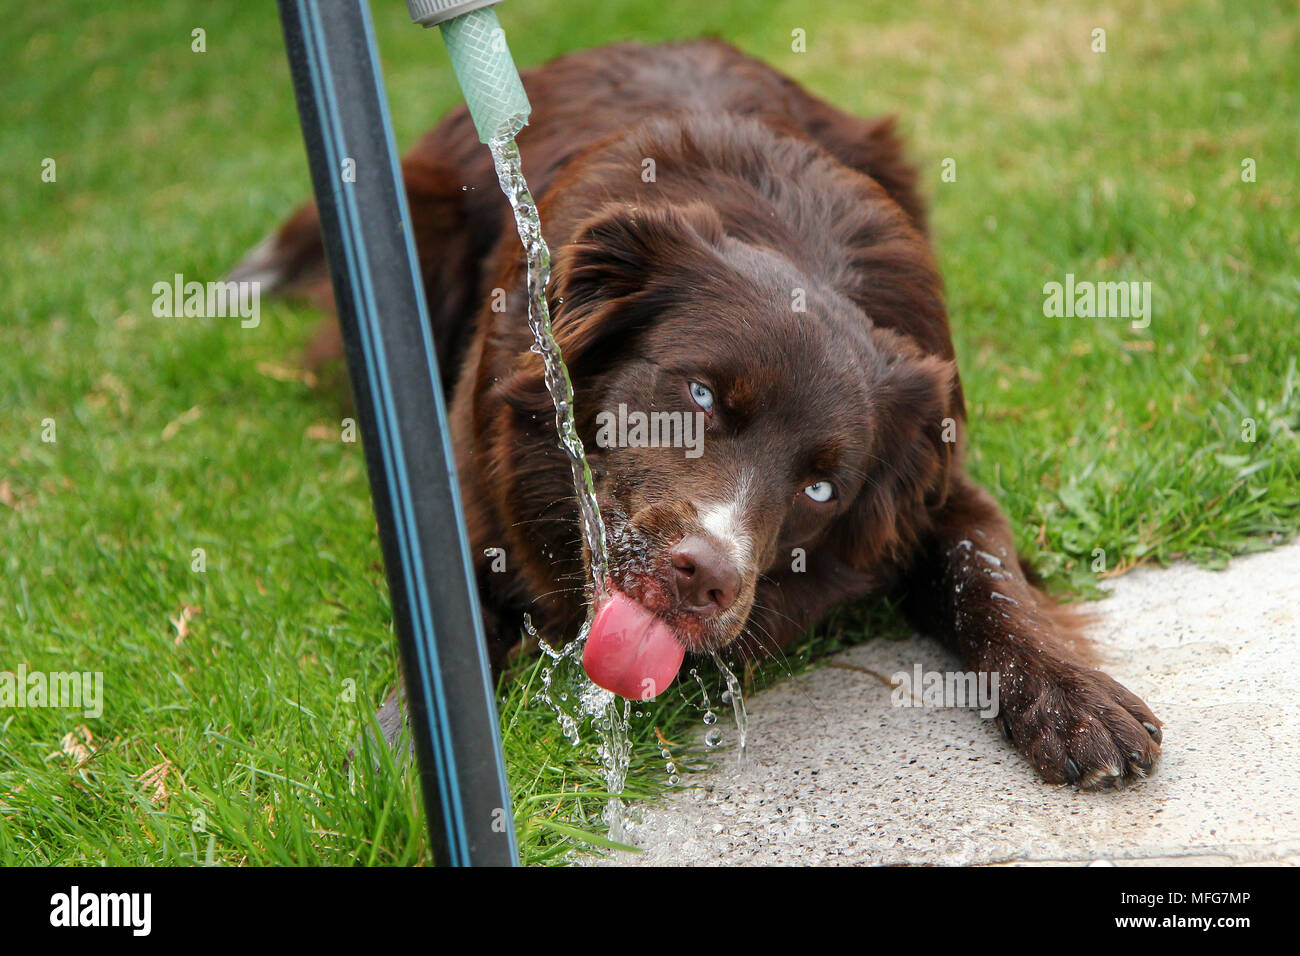 A thirsty dog is drinking water and looking quite funny. Stock Photo